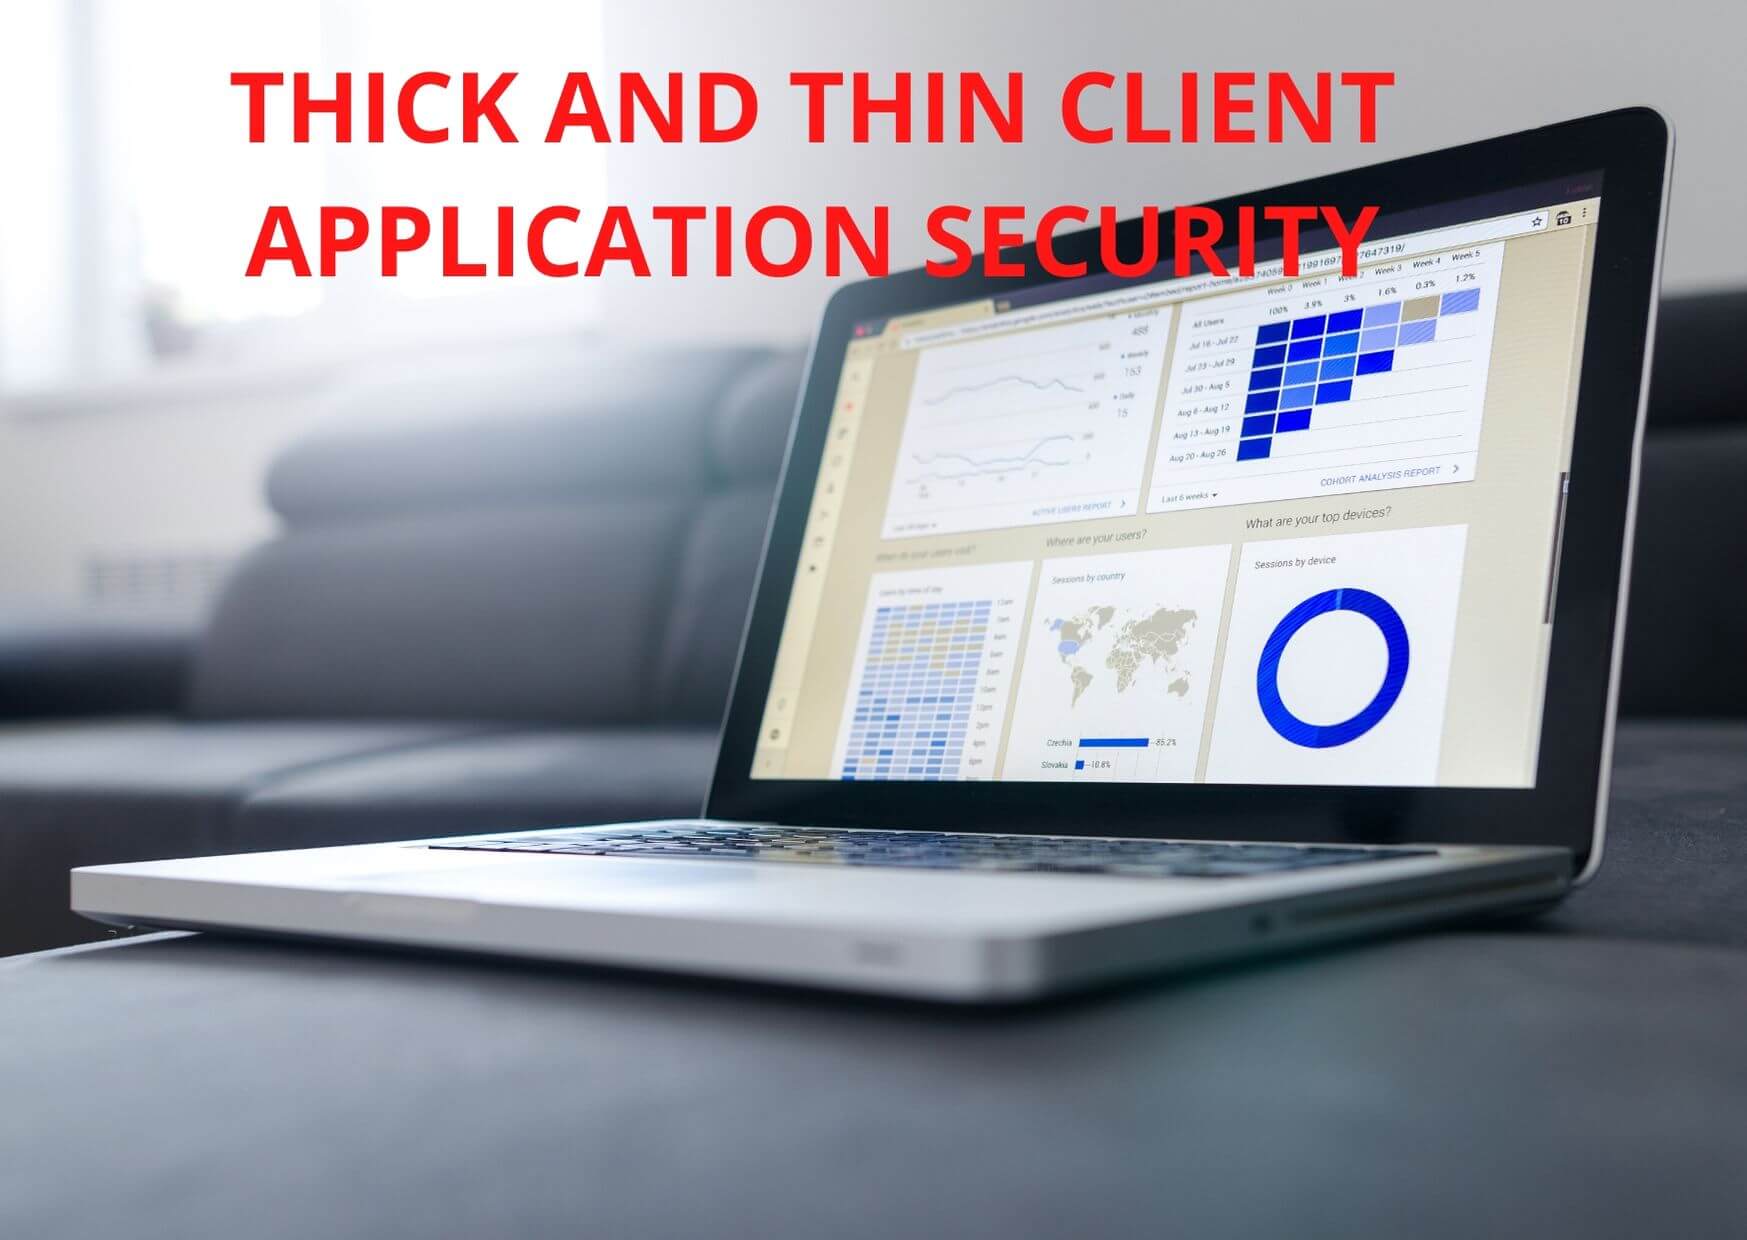 ThickandThinClient